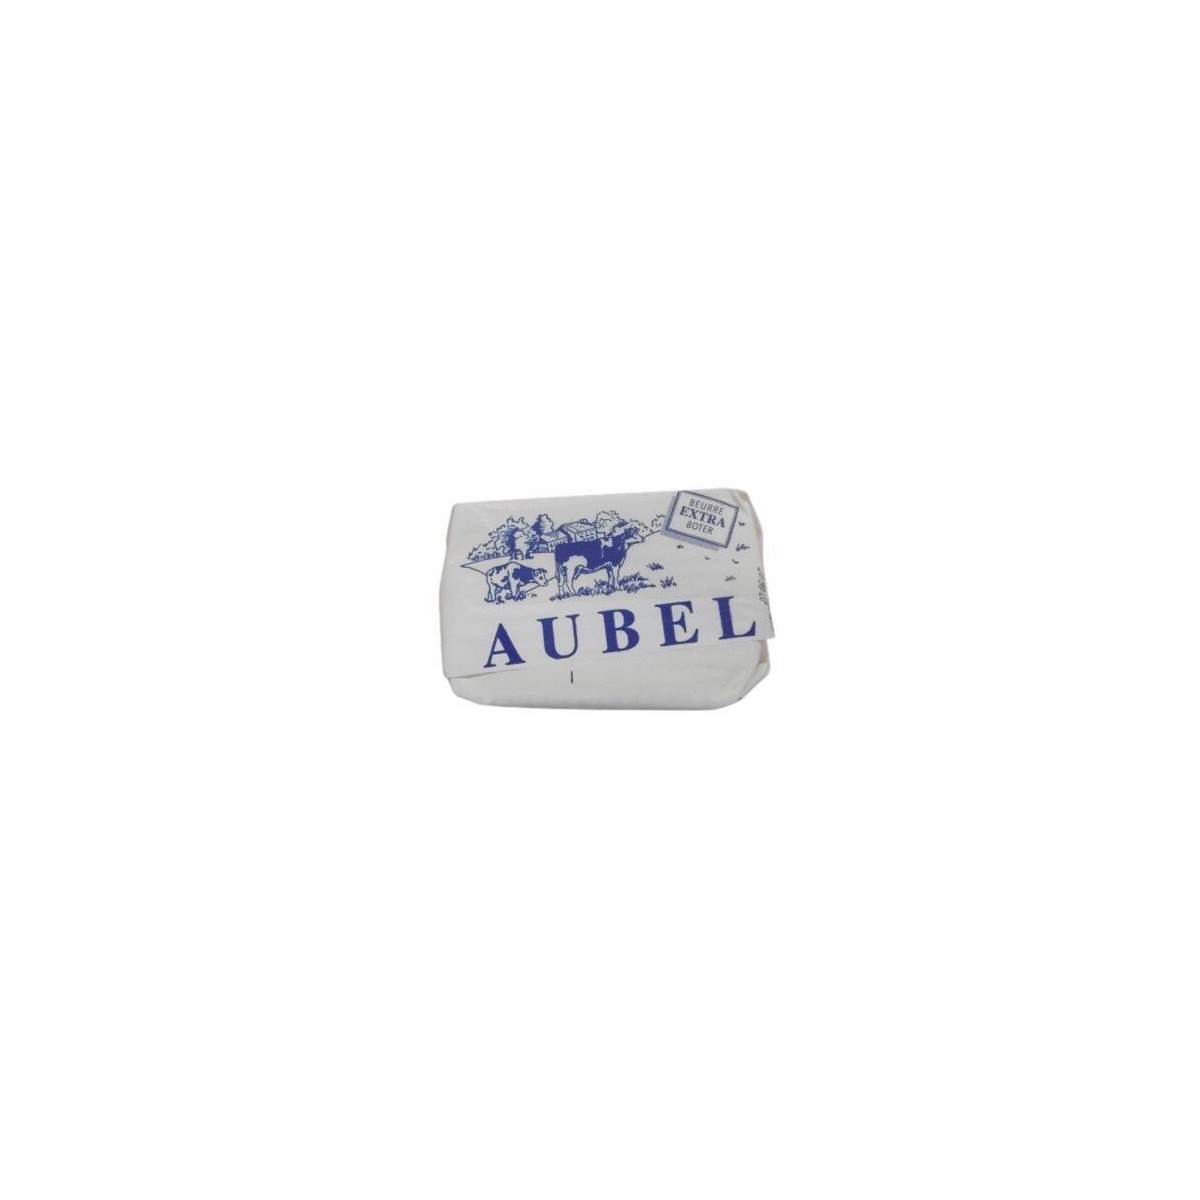 UNSALTED SWEET BUTTER AUBEL BOX OF 20 X 500GR  PACKAGE